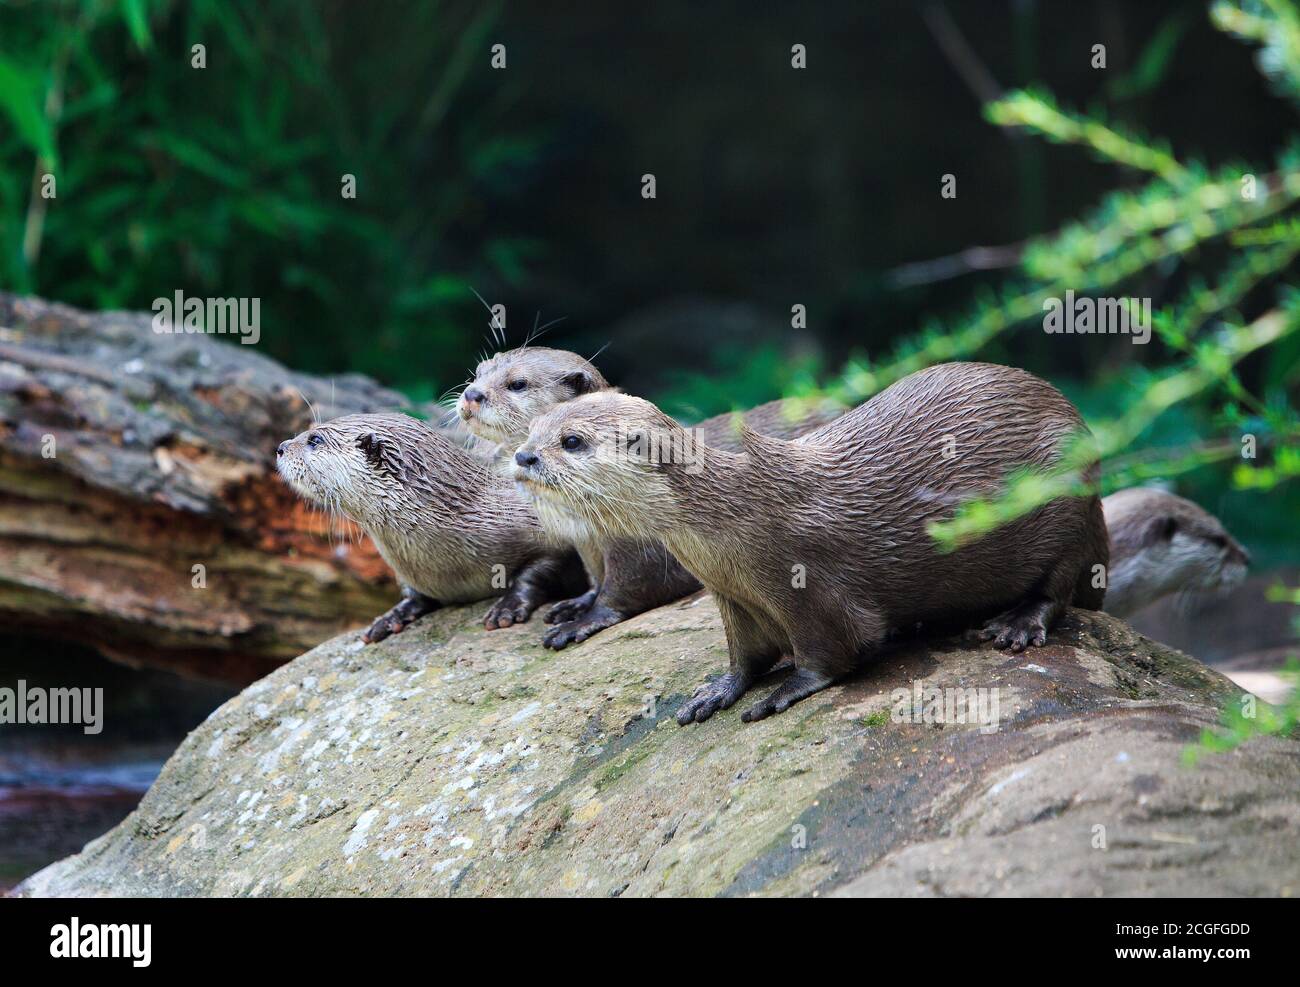 Three short-clawed Asian Otters resting on rocks all looking in the same direction with a natural background Stock Photo